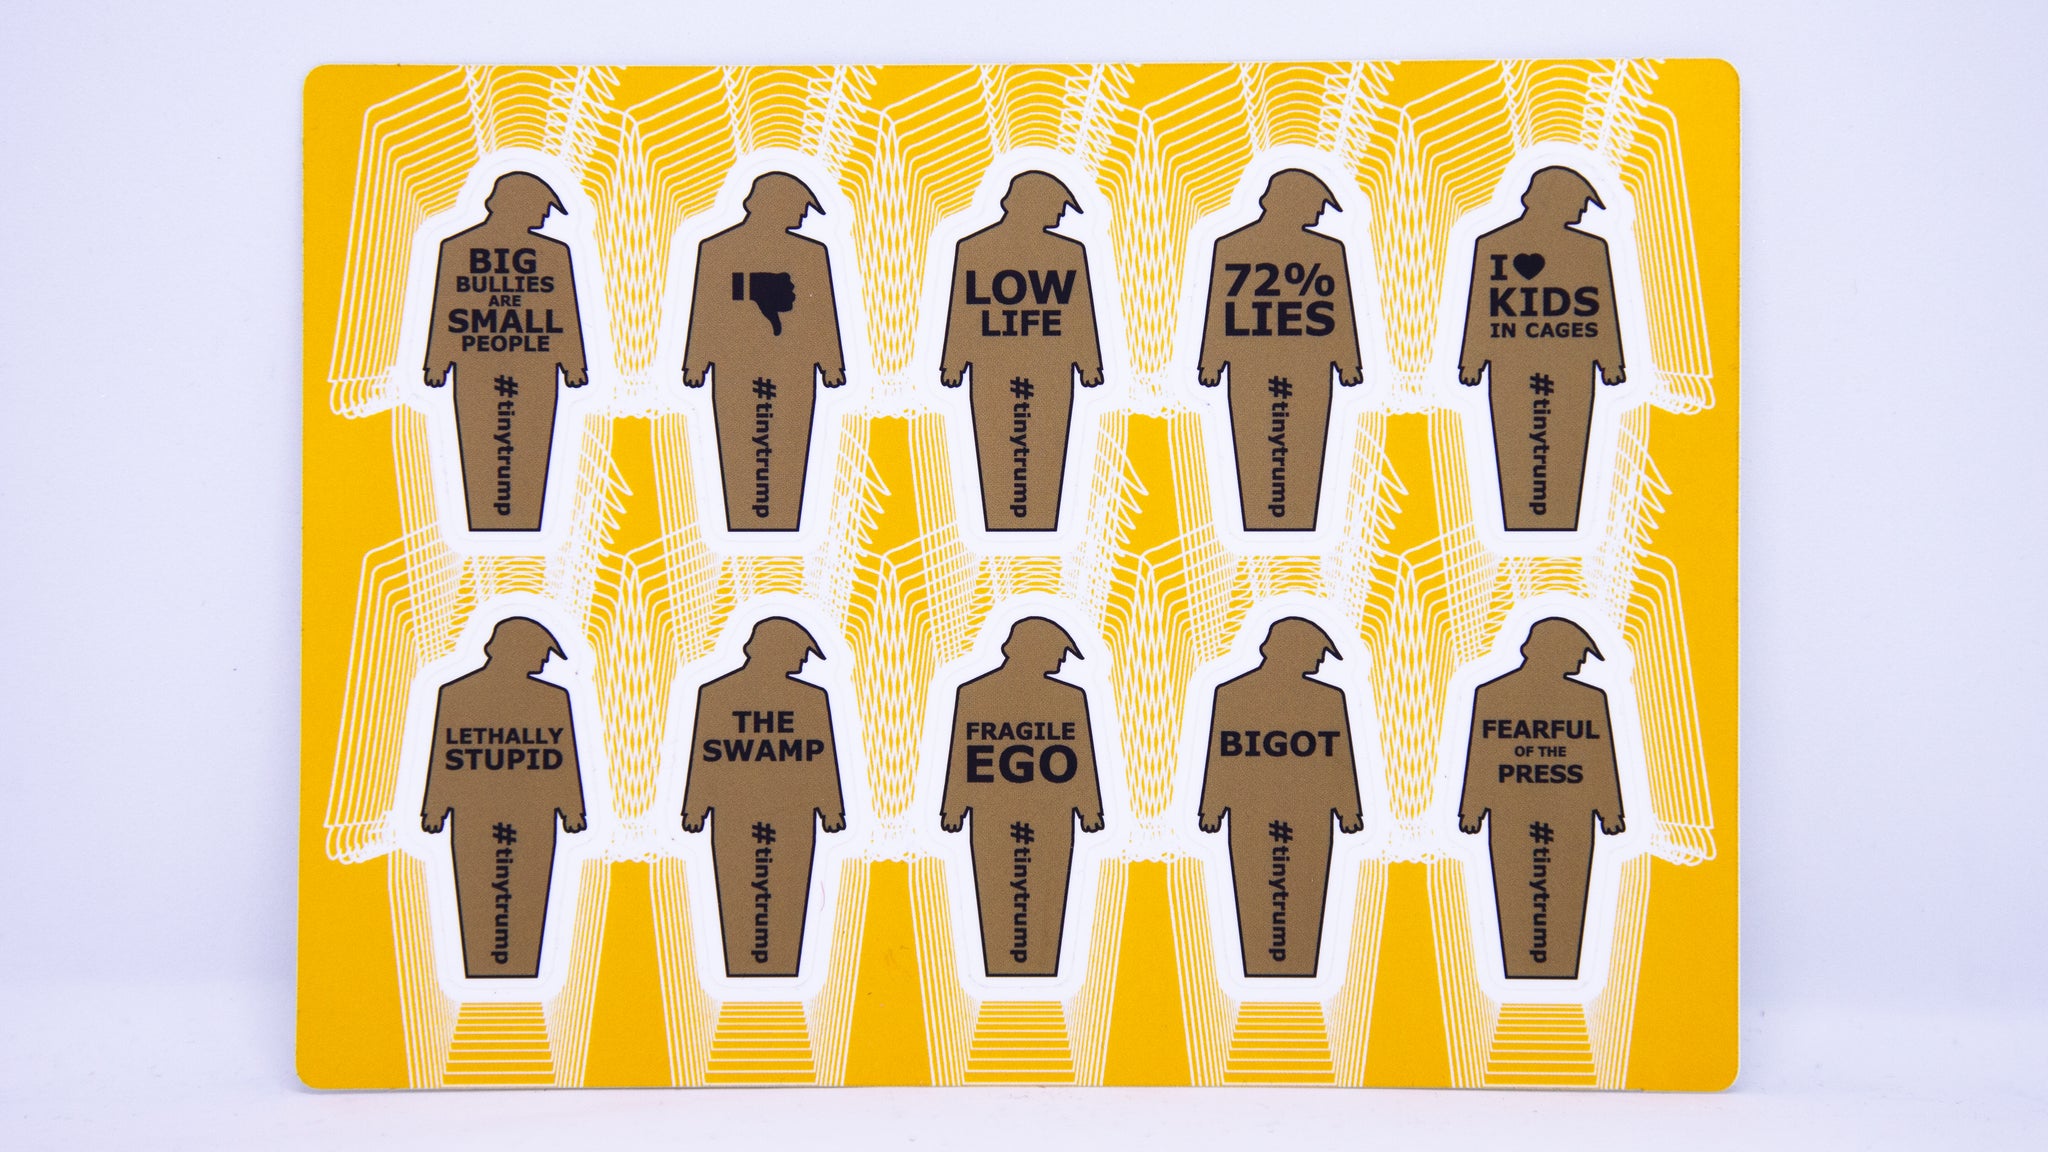 A sticker sheet with 10 two inch tall tiny trumps with the following slogans: Big Bullies Are Small People, thumbs down symbol, Low Life, 72% Lies, I heart Kids in Cages, Lethally Stupid, The Swamp, Fragile Ego, Bigot, Fearful of the Press